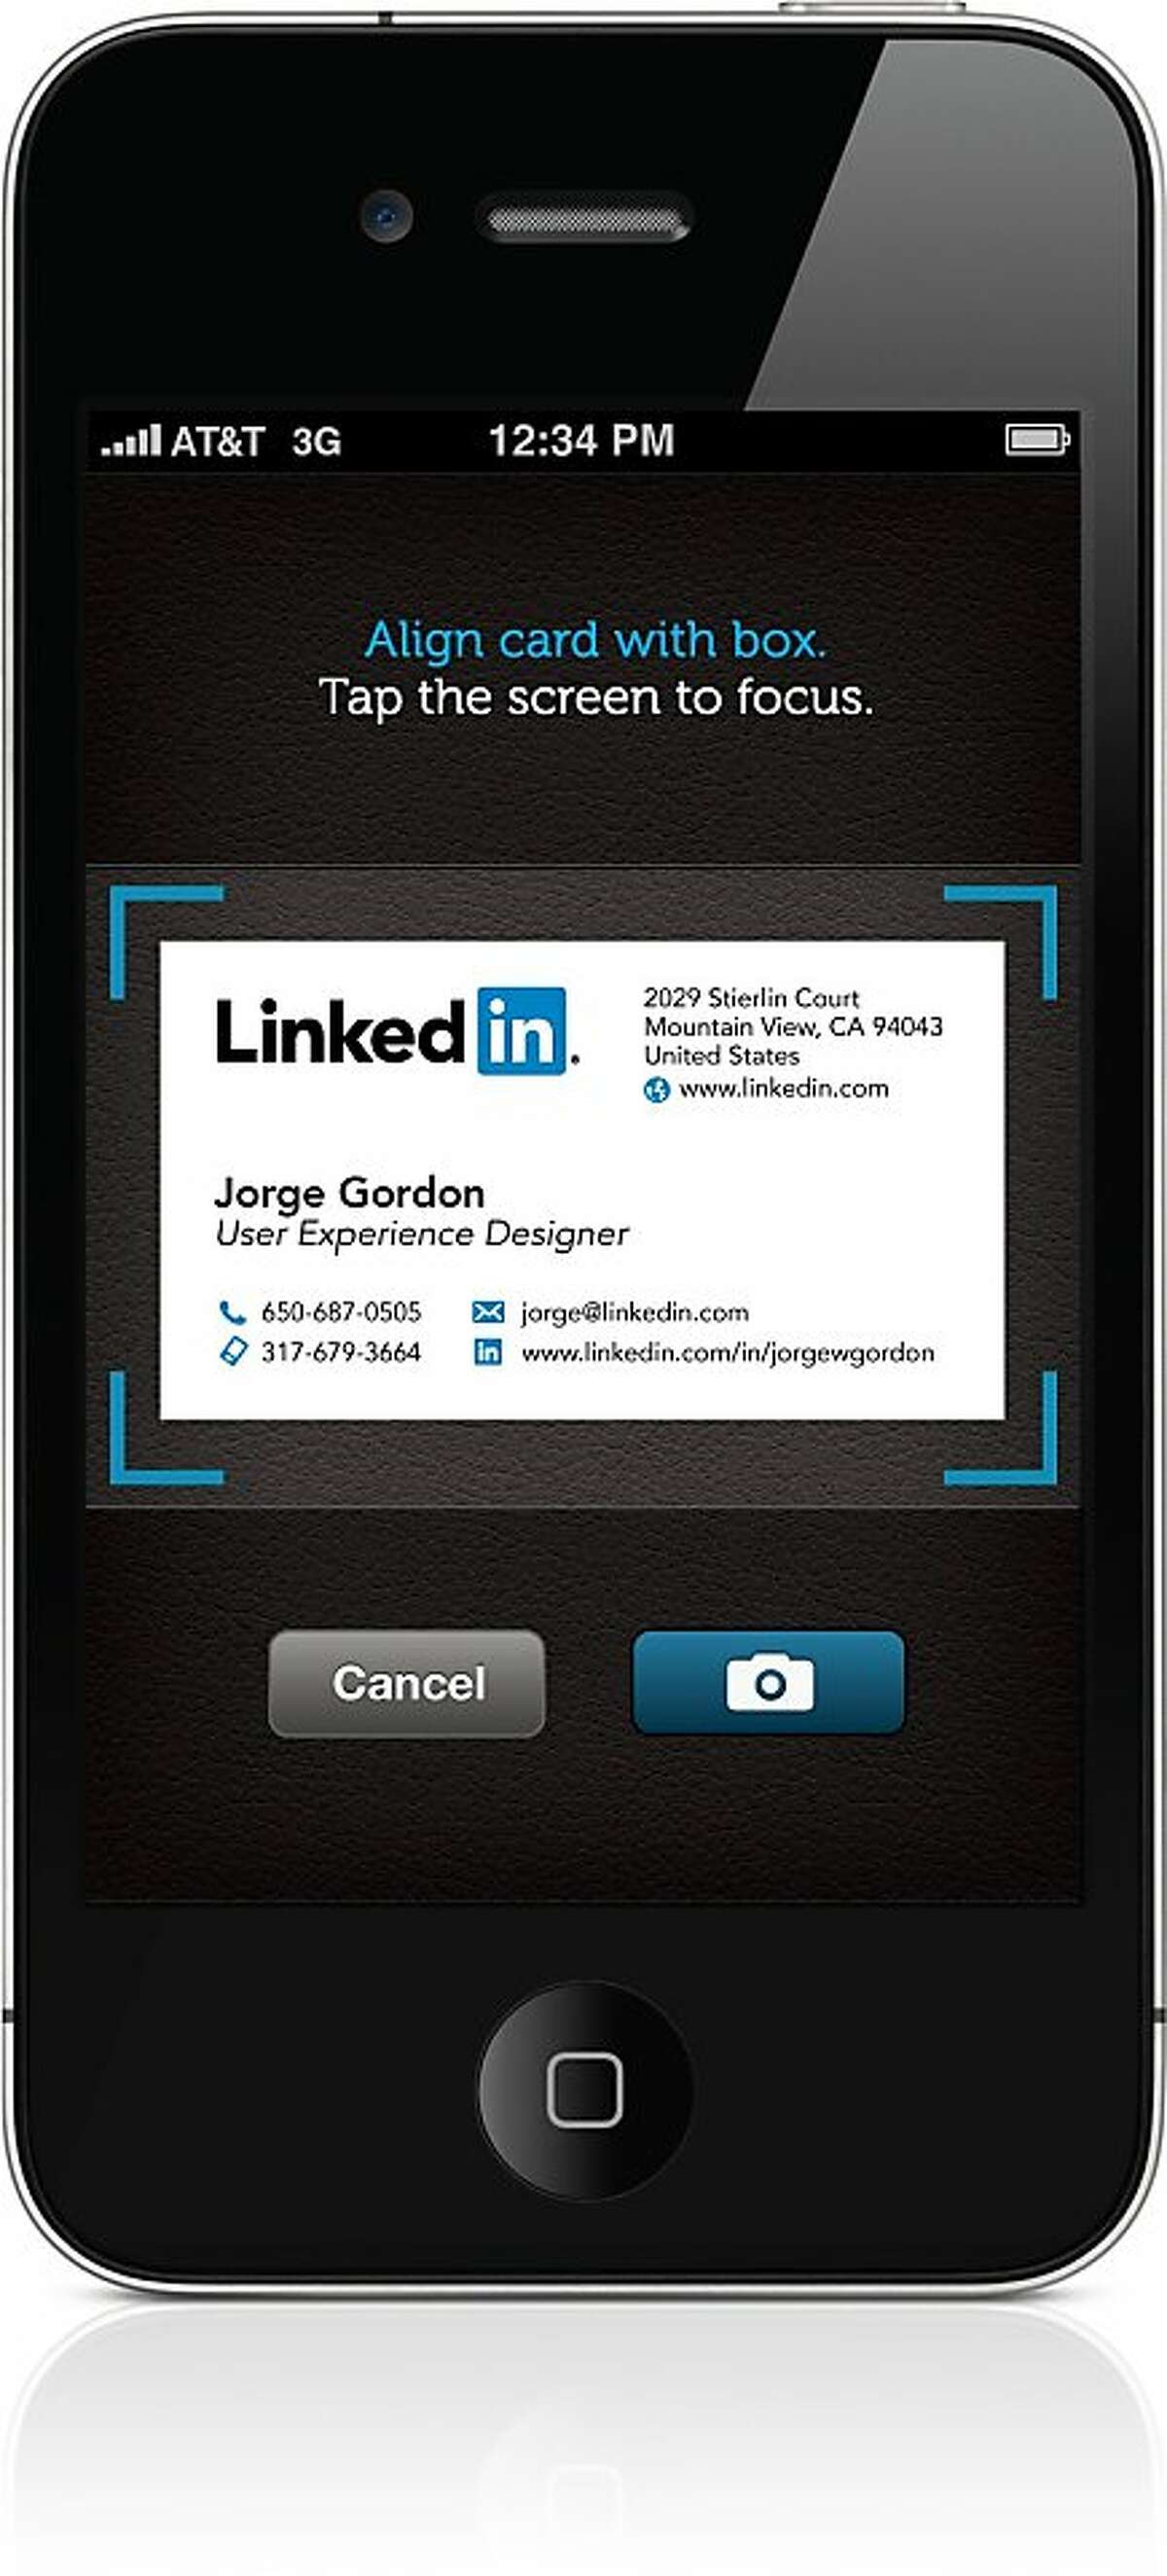 An undated screenshot of LinkedIn's new iphone app which takes photos of business cards and organizes them.